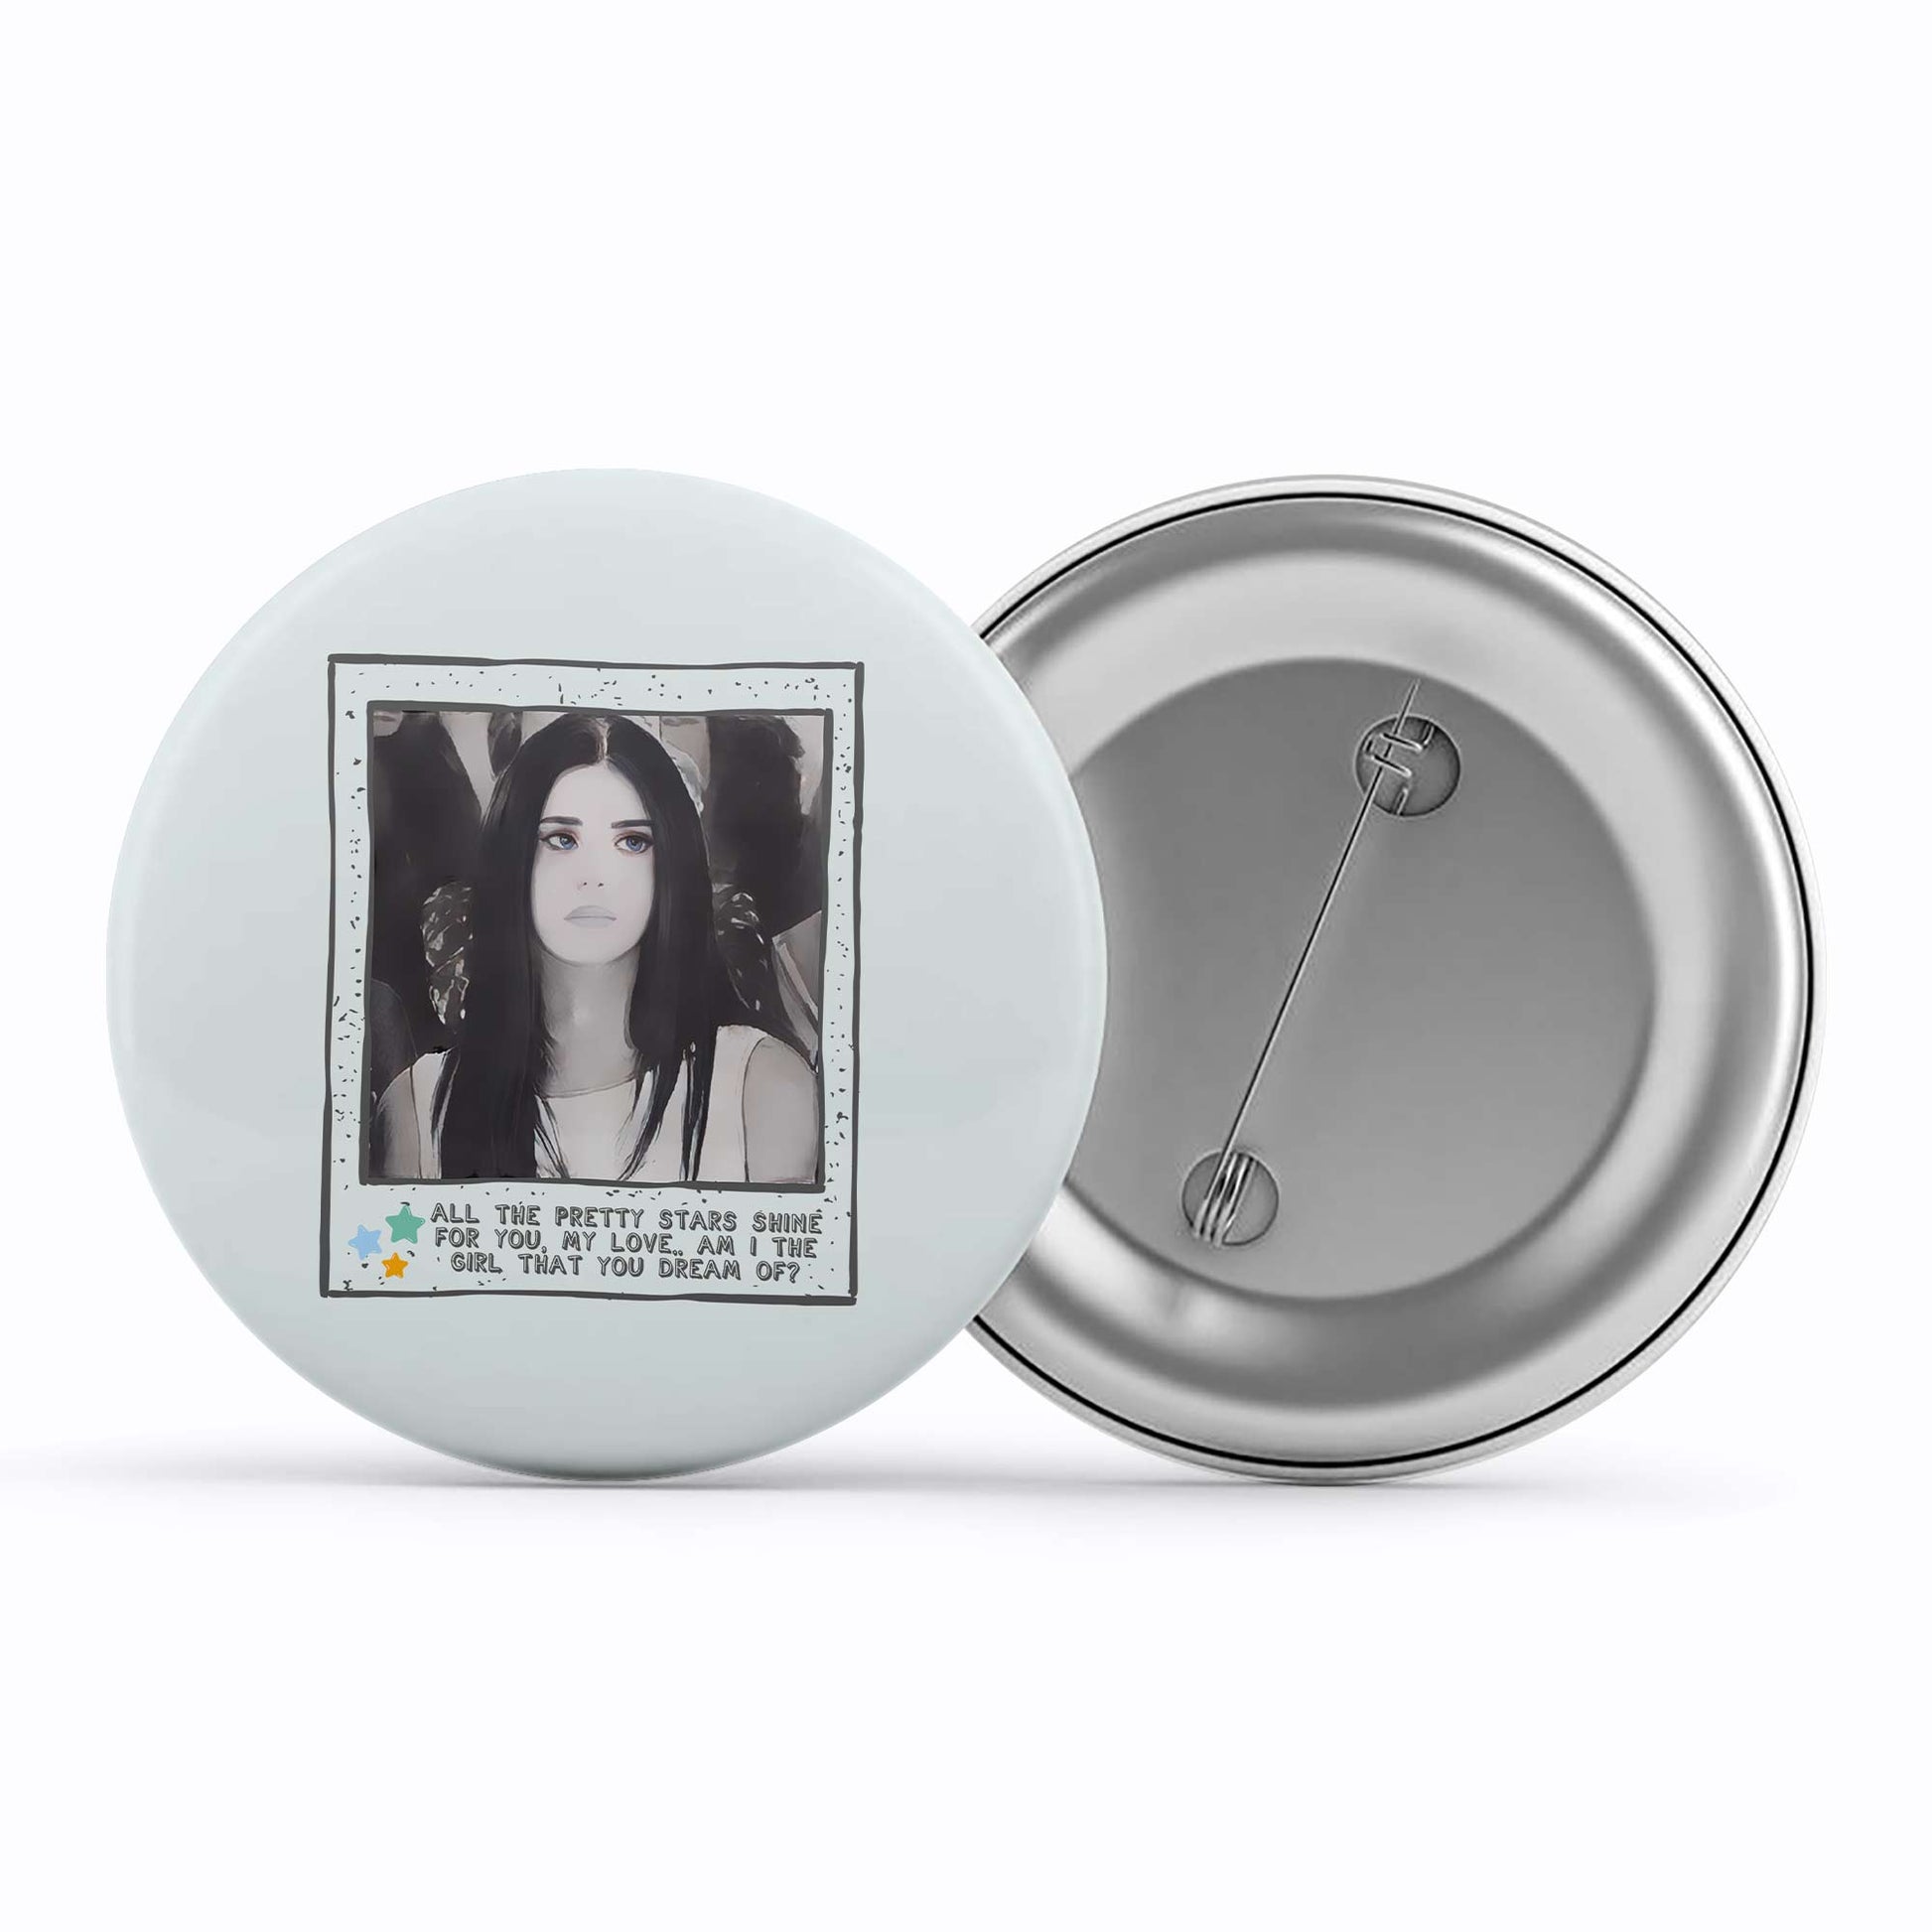 lana del rey pretty when you cry badge pin button music band buy online india the banyan tee tbt men women girls boys unisex  